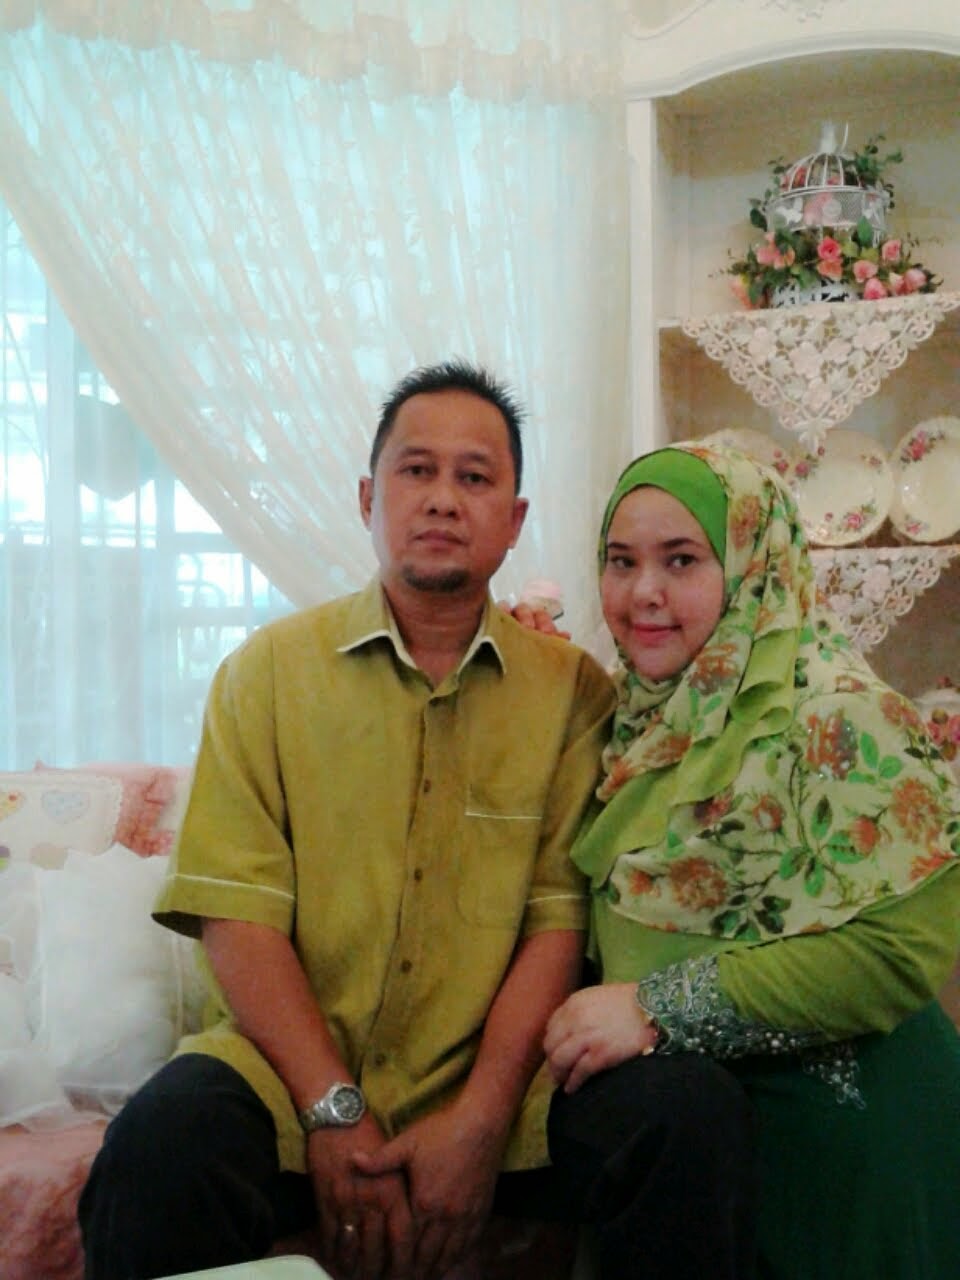 Me & my Lovely hubby